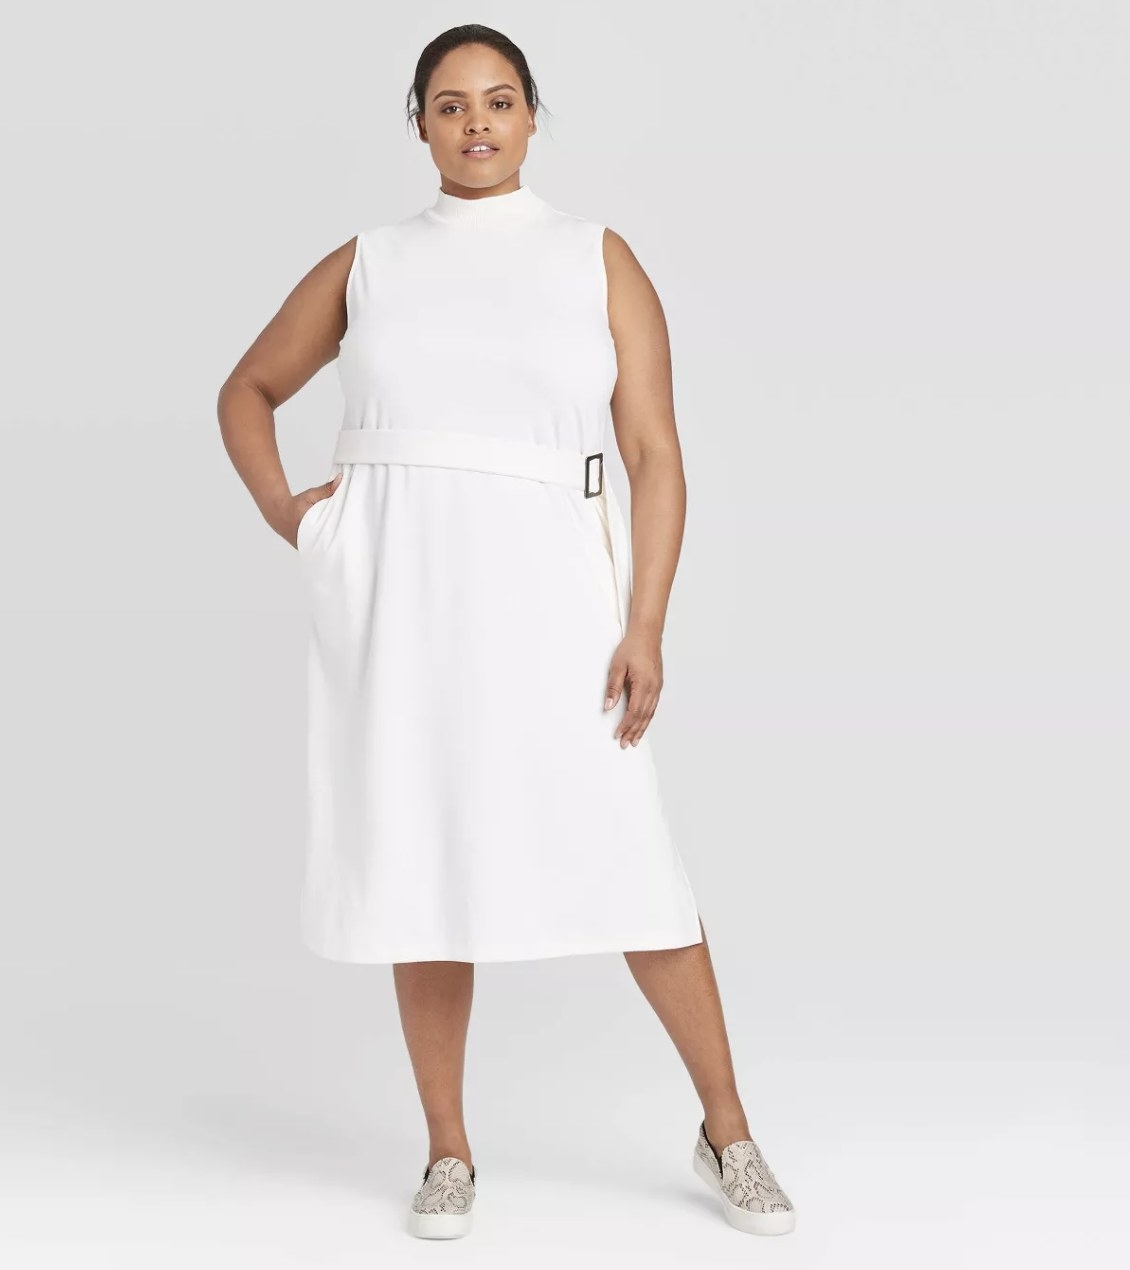 31 Pieces Of PlusSize Clothing You Can Get At Target That Are Actually